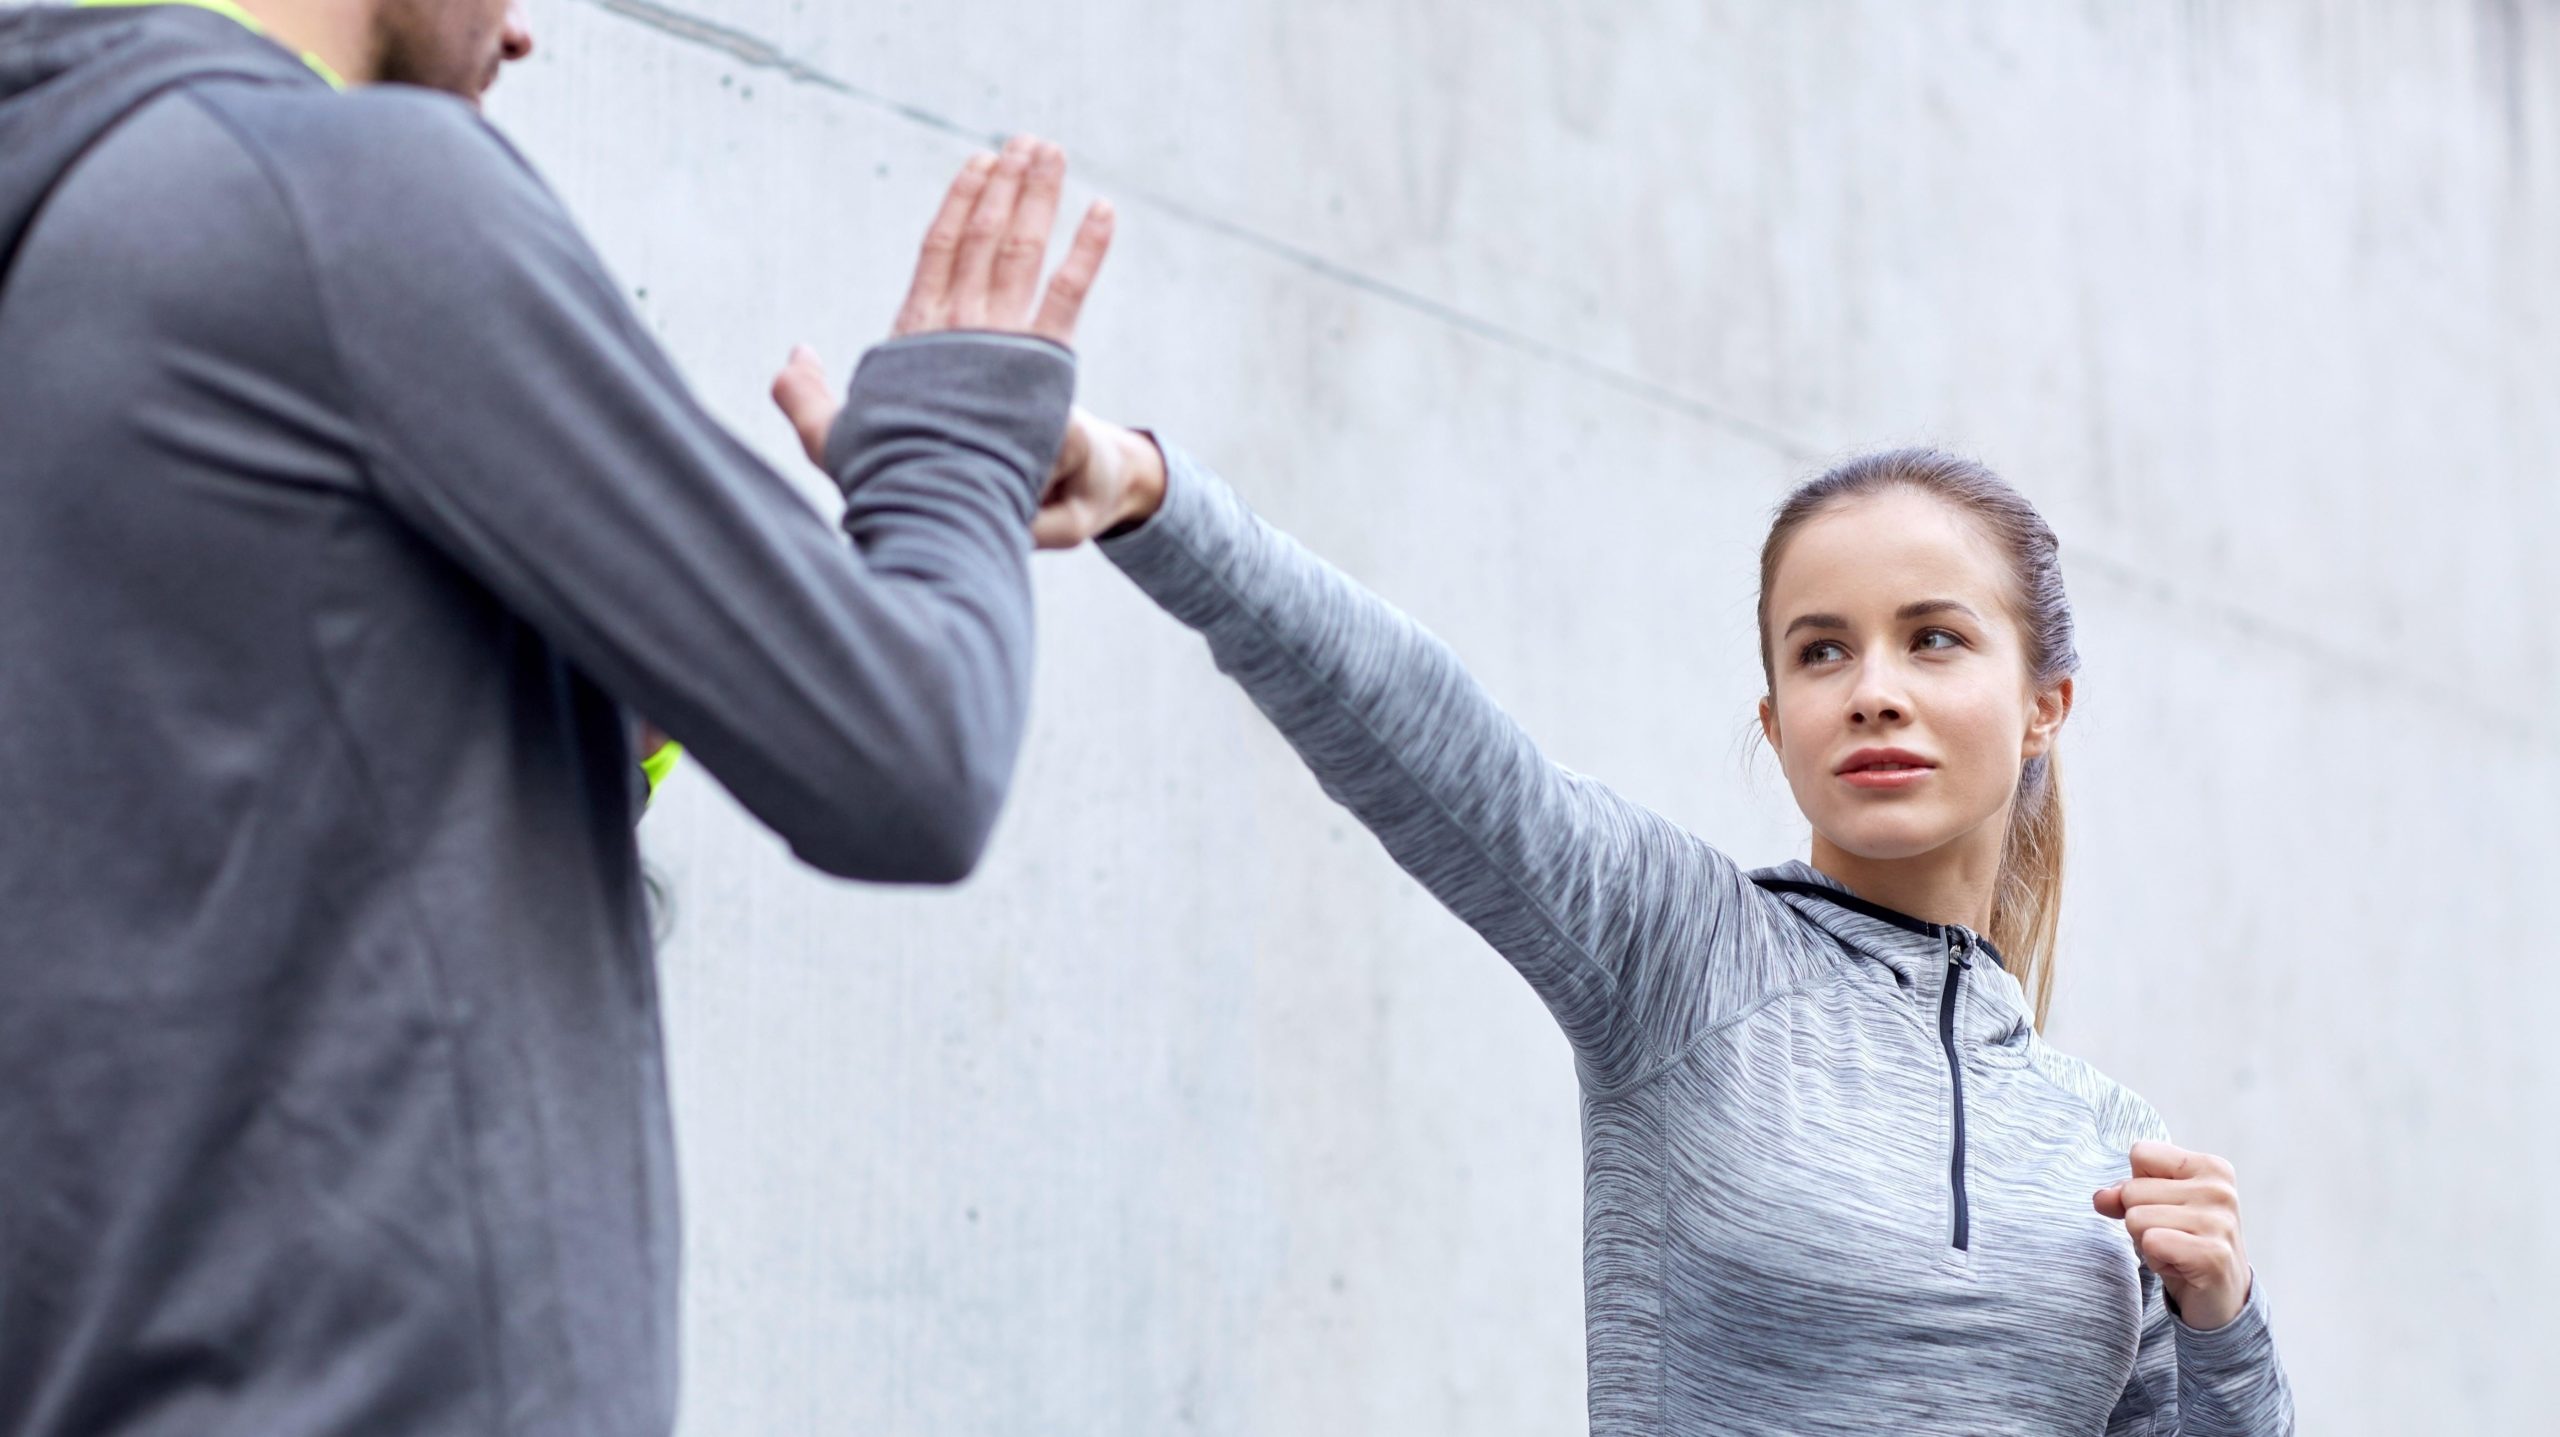 Are Self-Defence Classes Really Worth It?